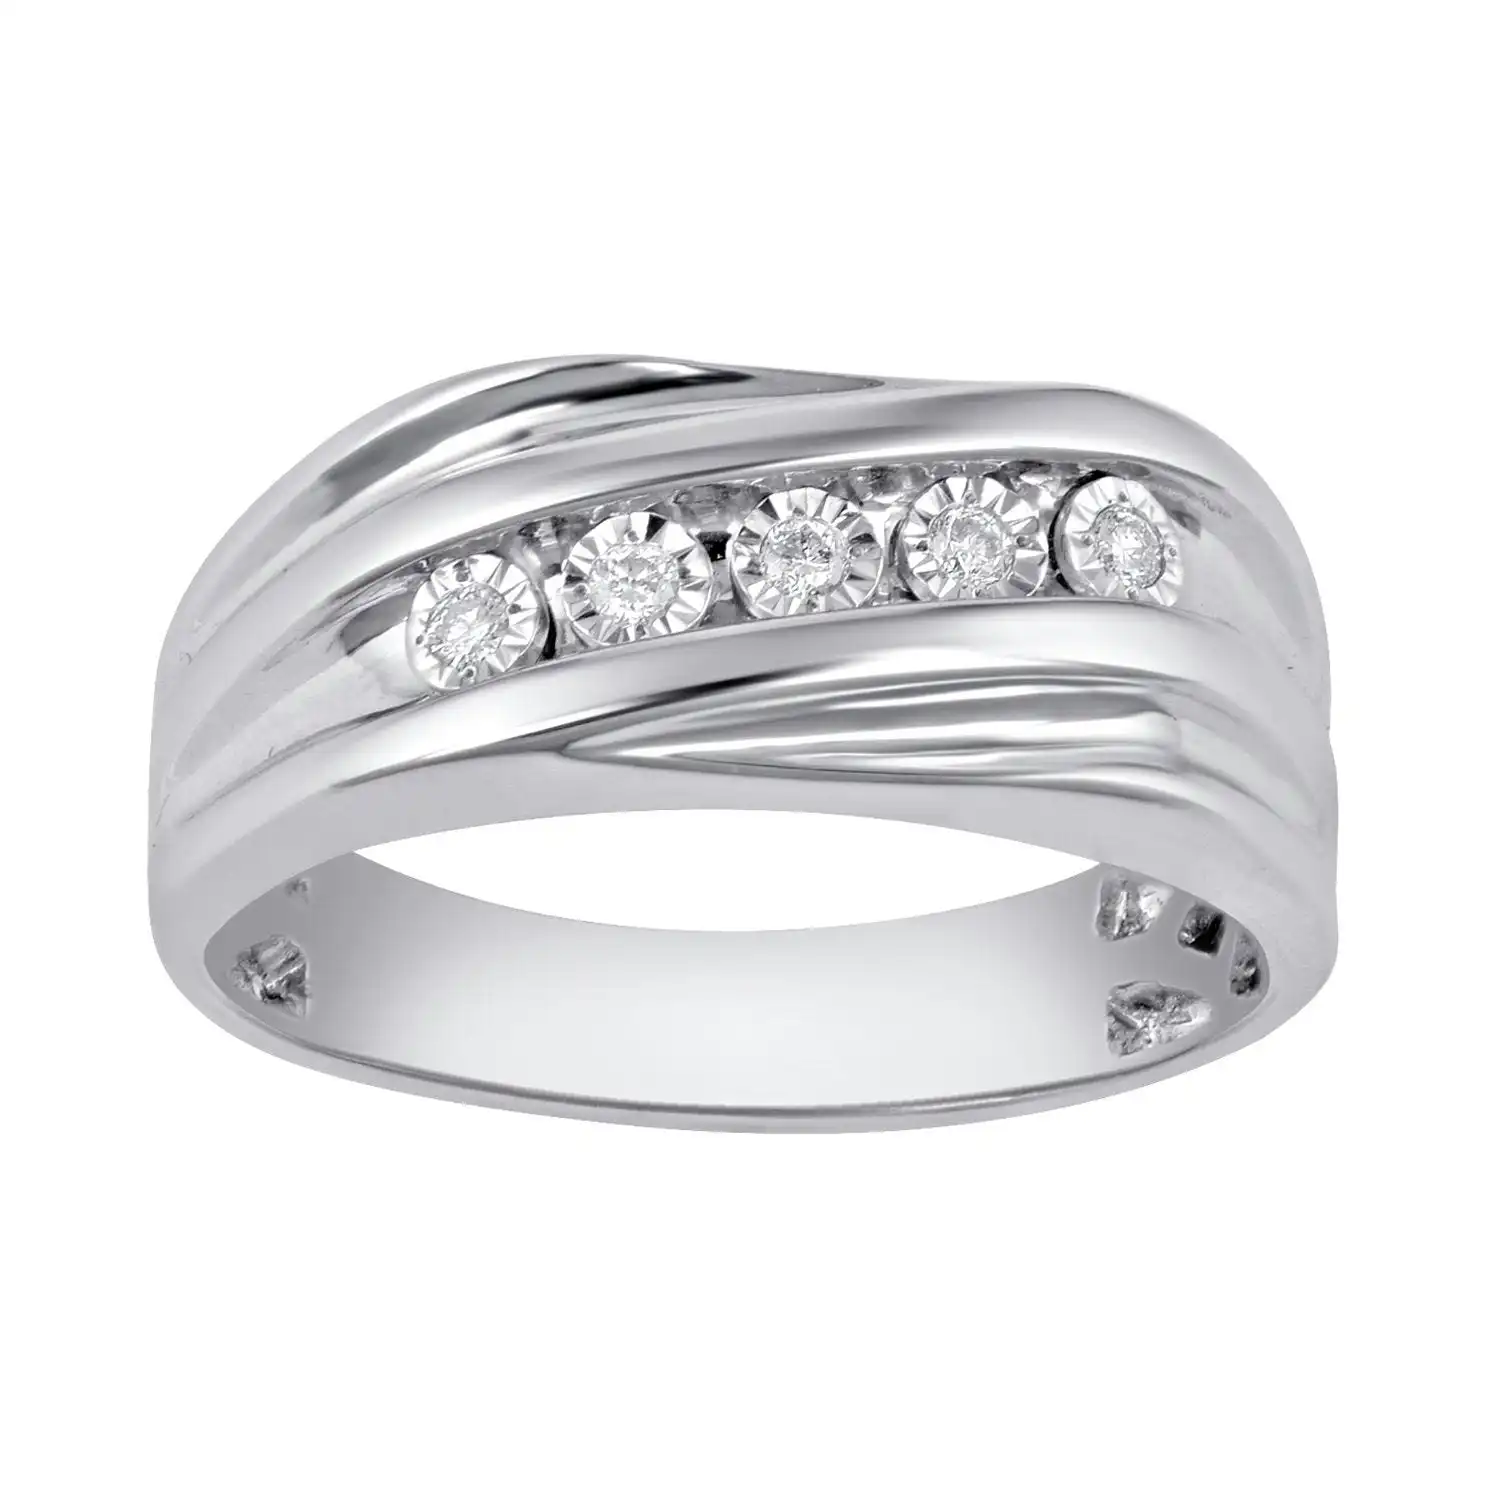 Mirage Crossover Men's Ring with 0.10ct of Diamonds in Sterling Silver